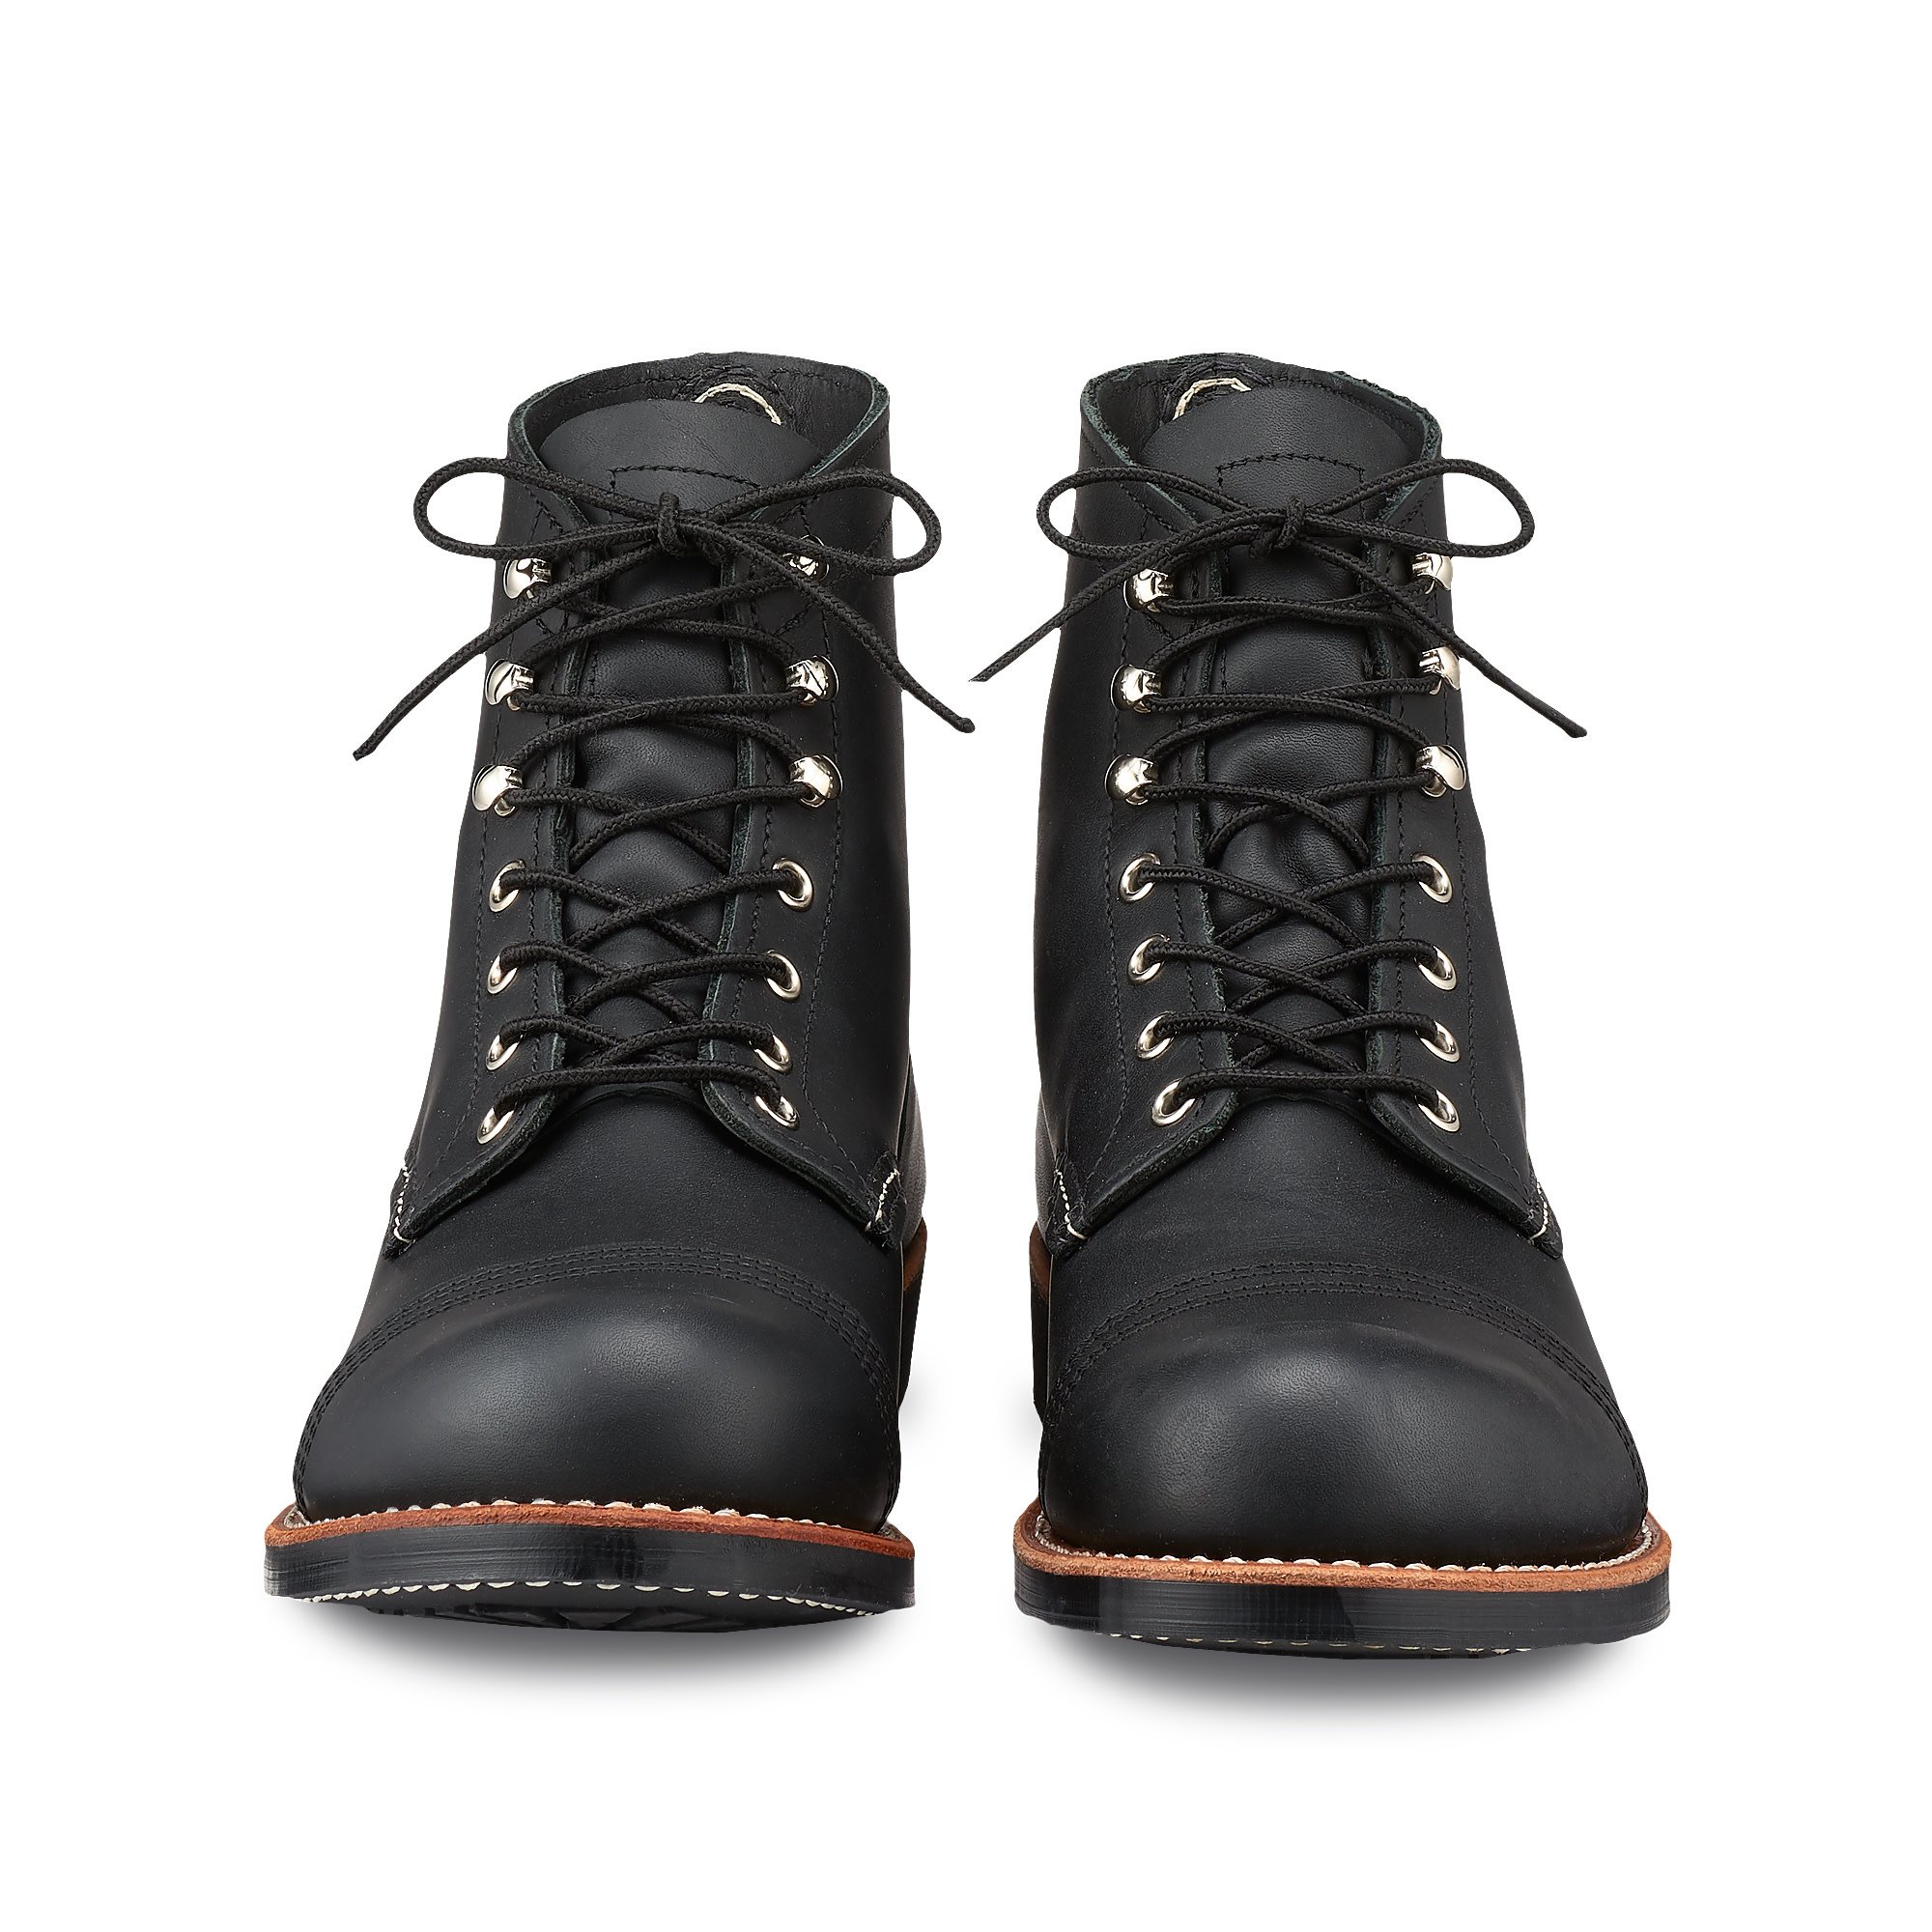 Red Wing Red Wing Iron Ranger 8084 - Black Harness Leather